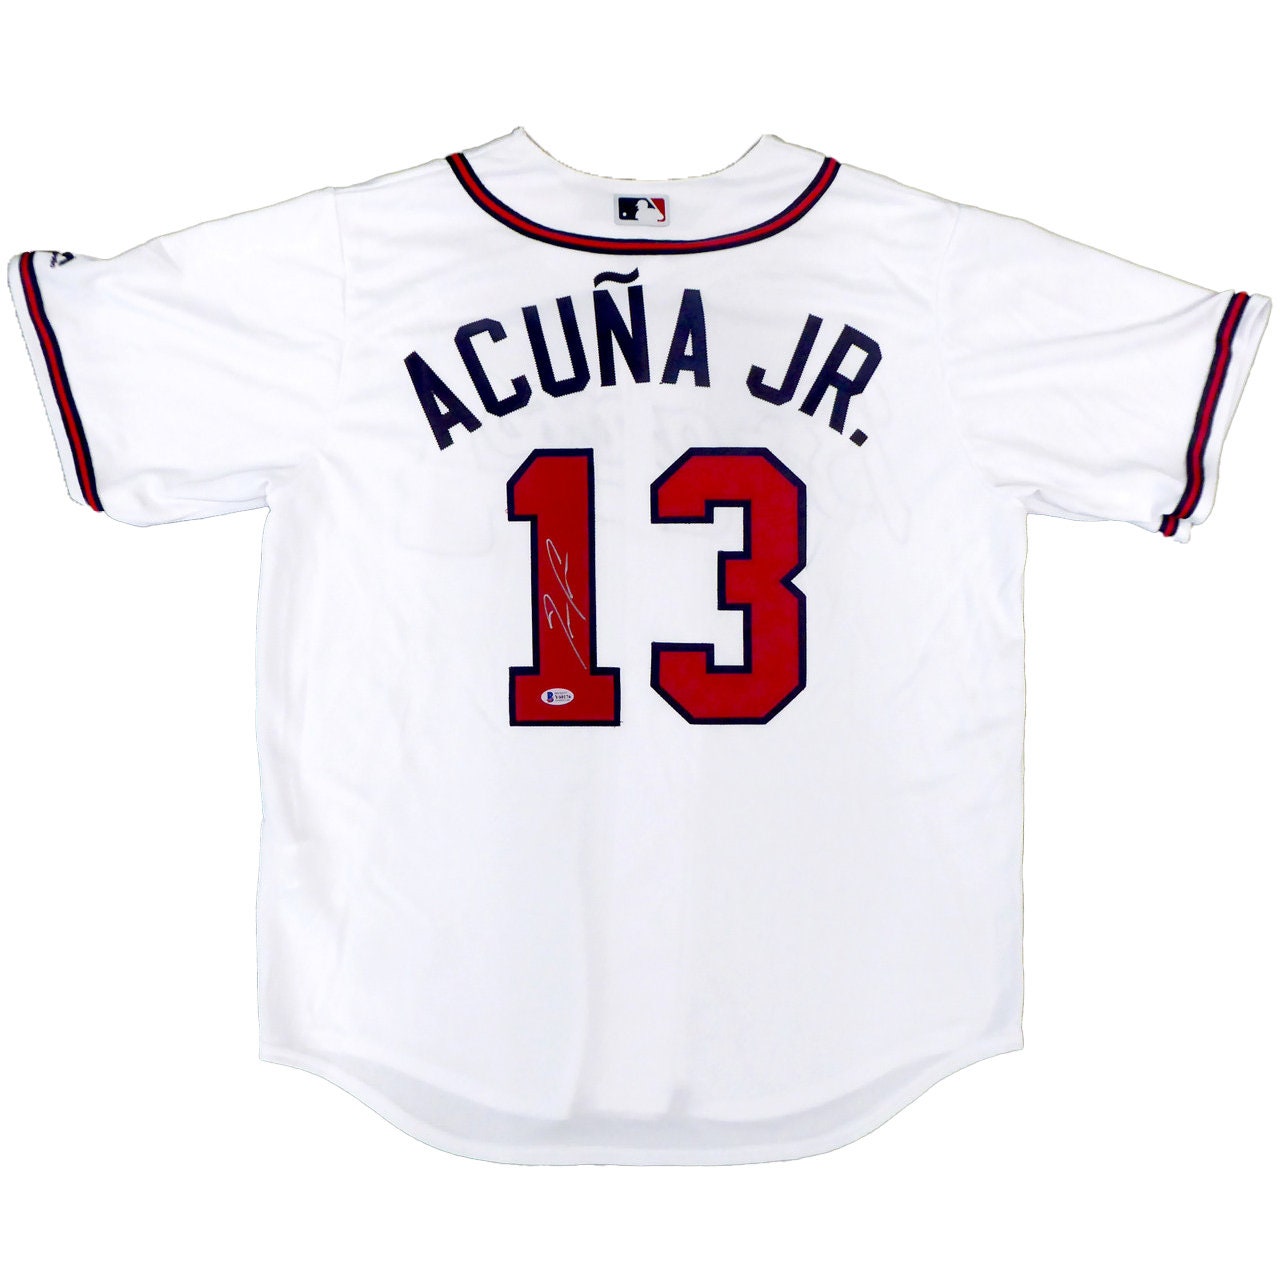 acuna youth jersey